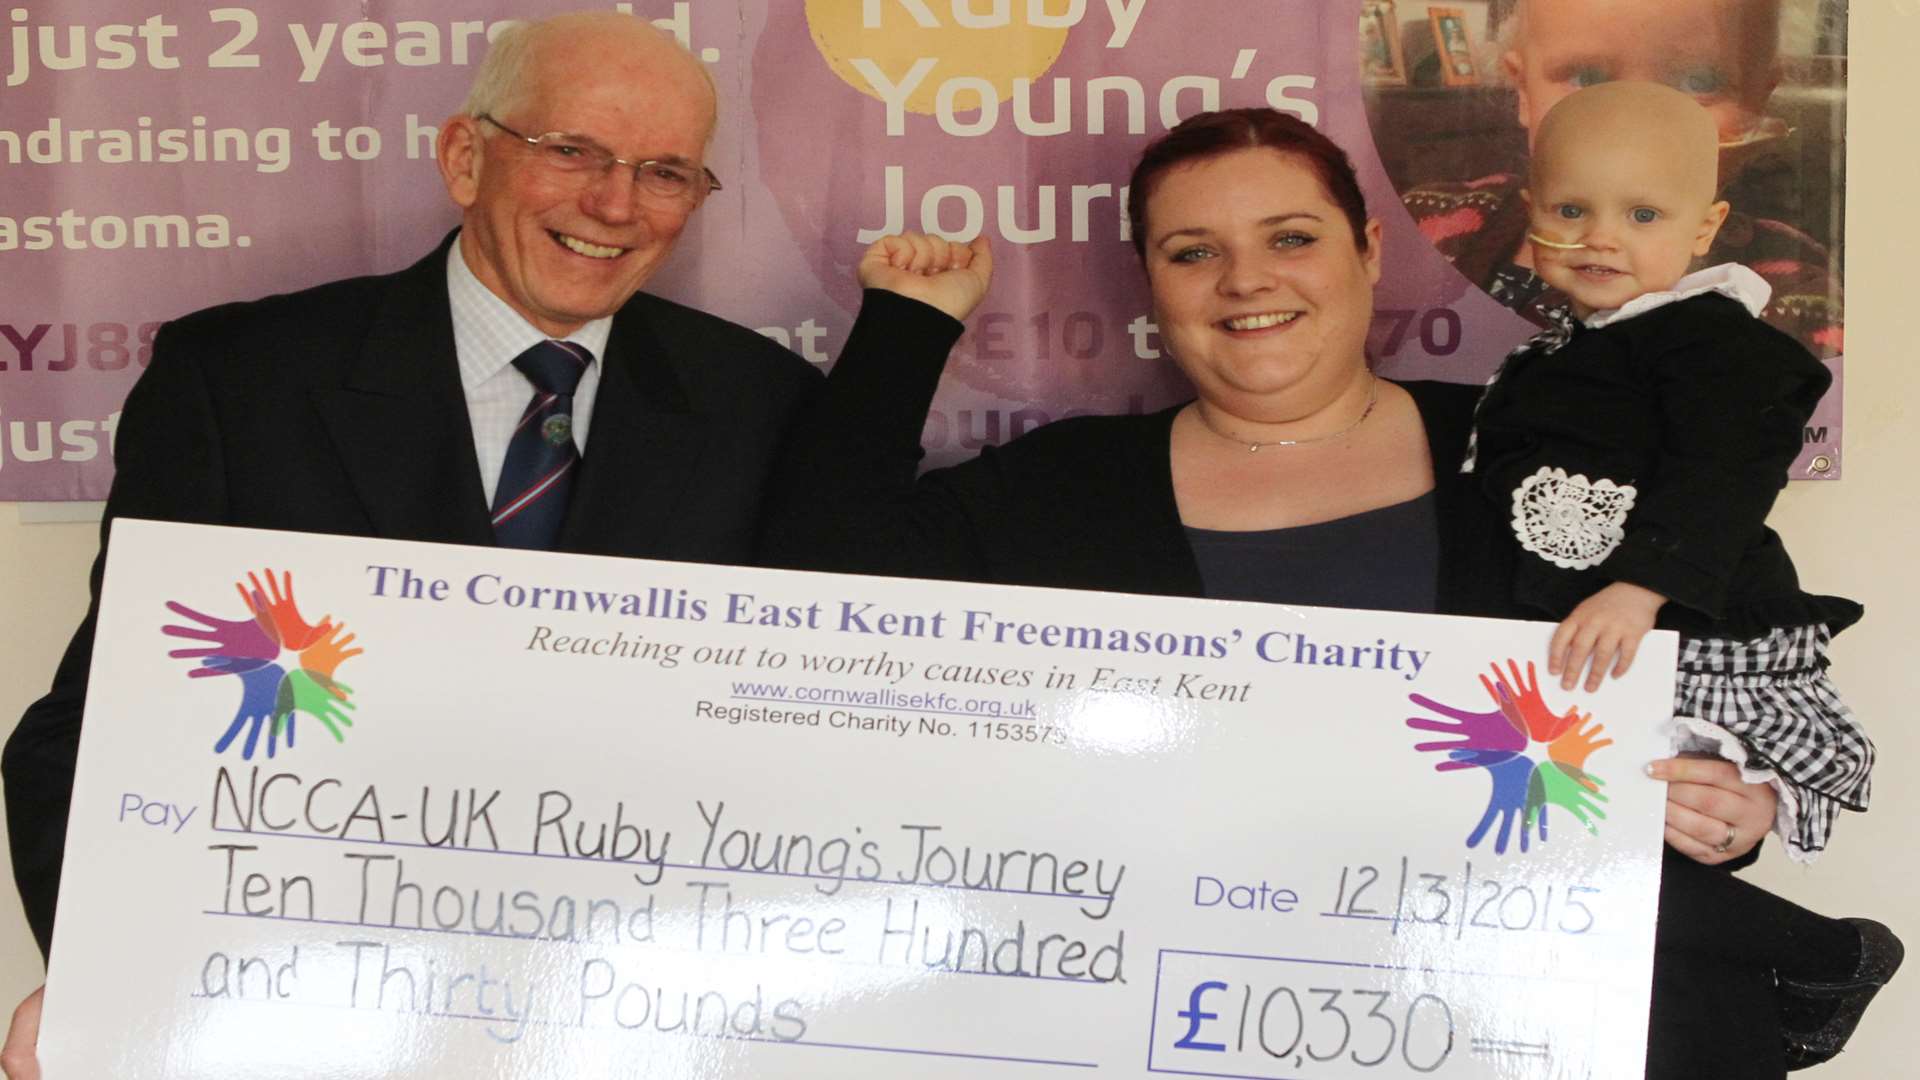 Andy Notley, Rochester Lodge, presents Vickki Young with Ruby two years a cheque for £10334.